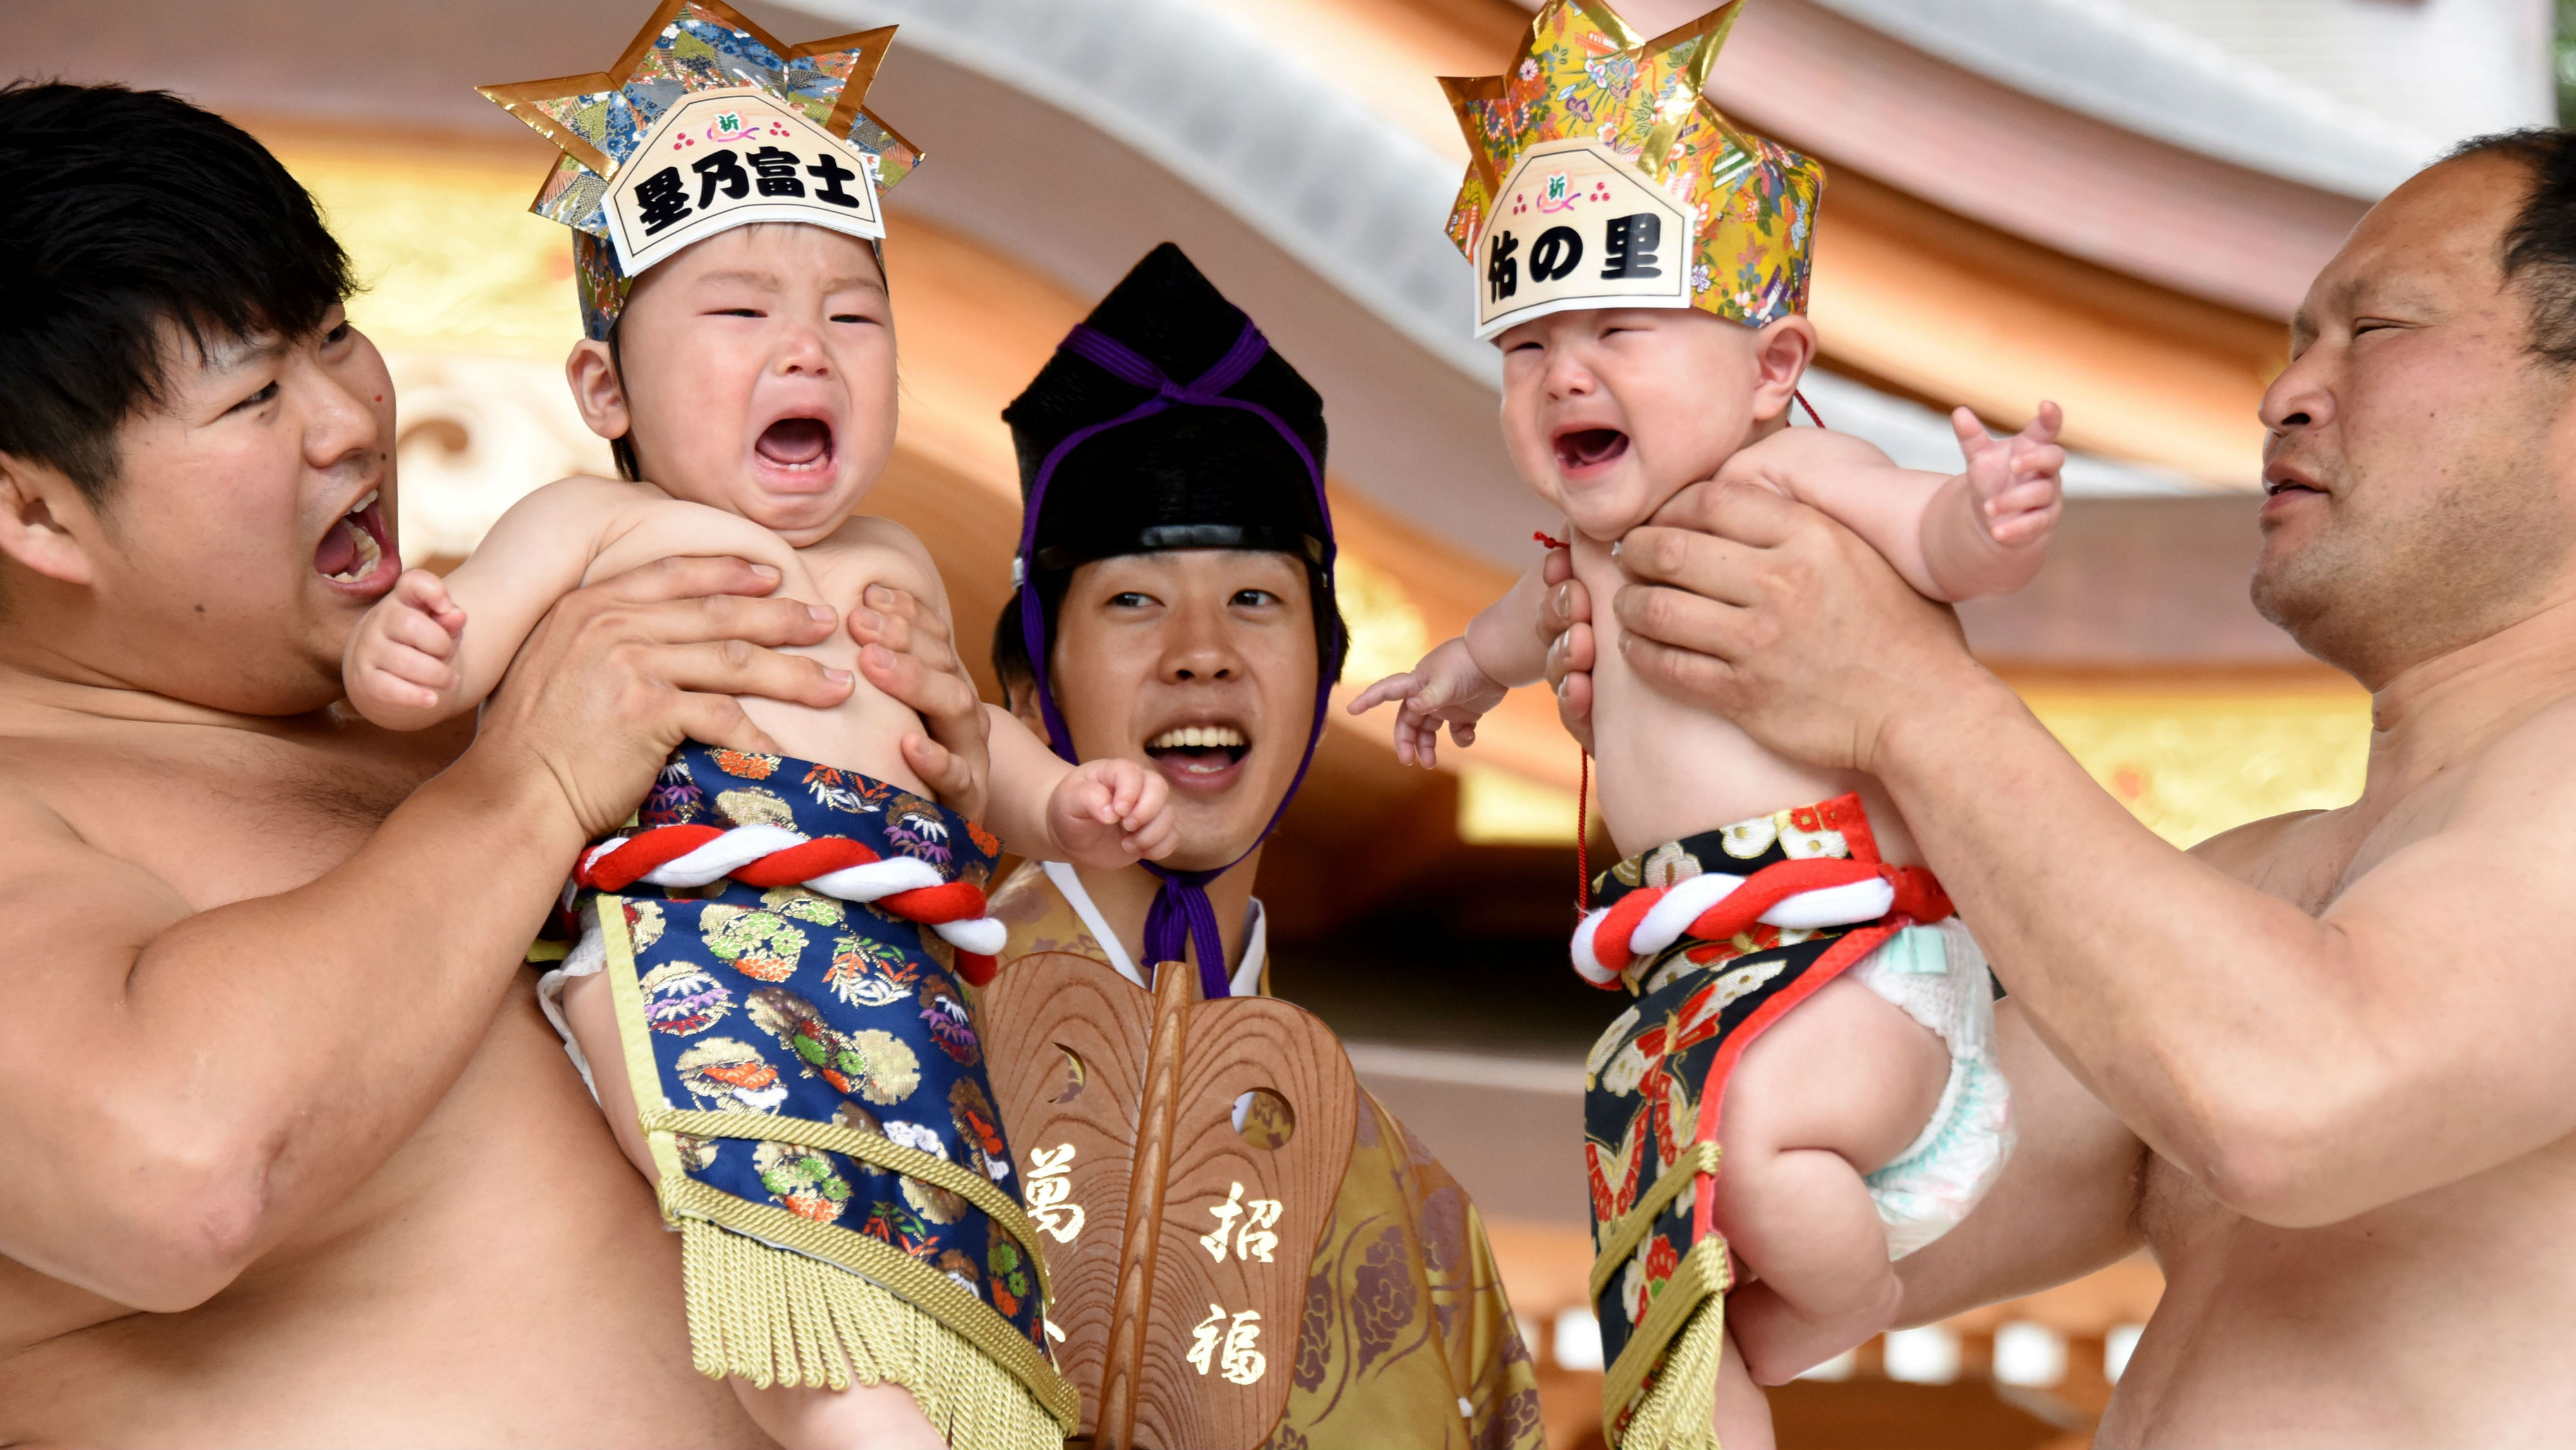 Baby cry sumo contest, Japan